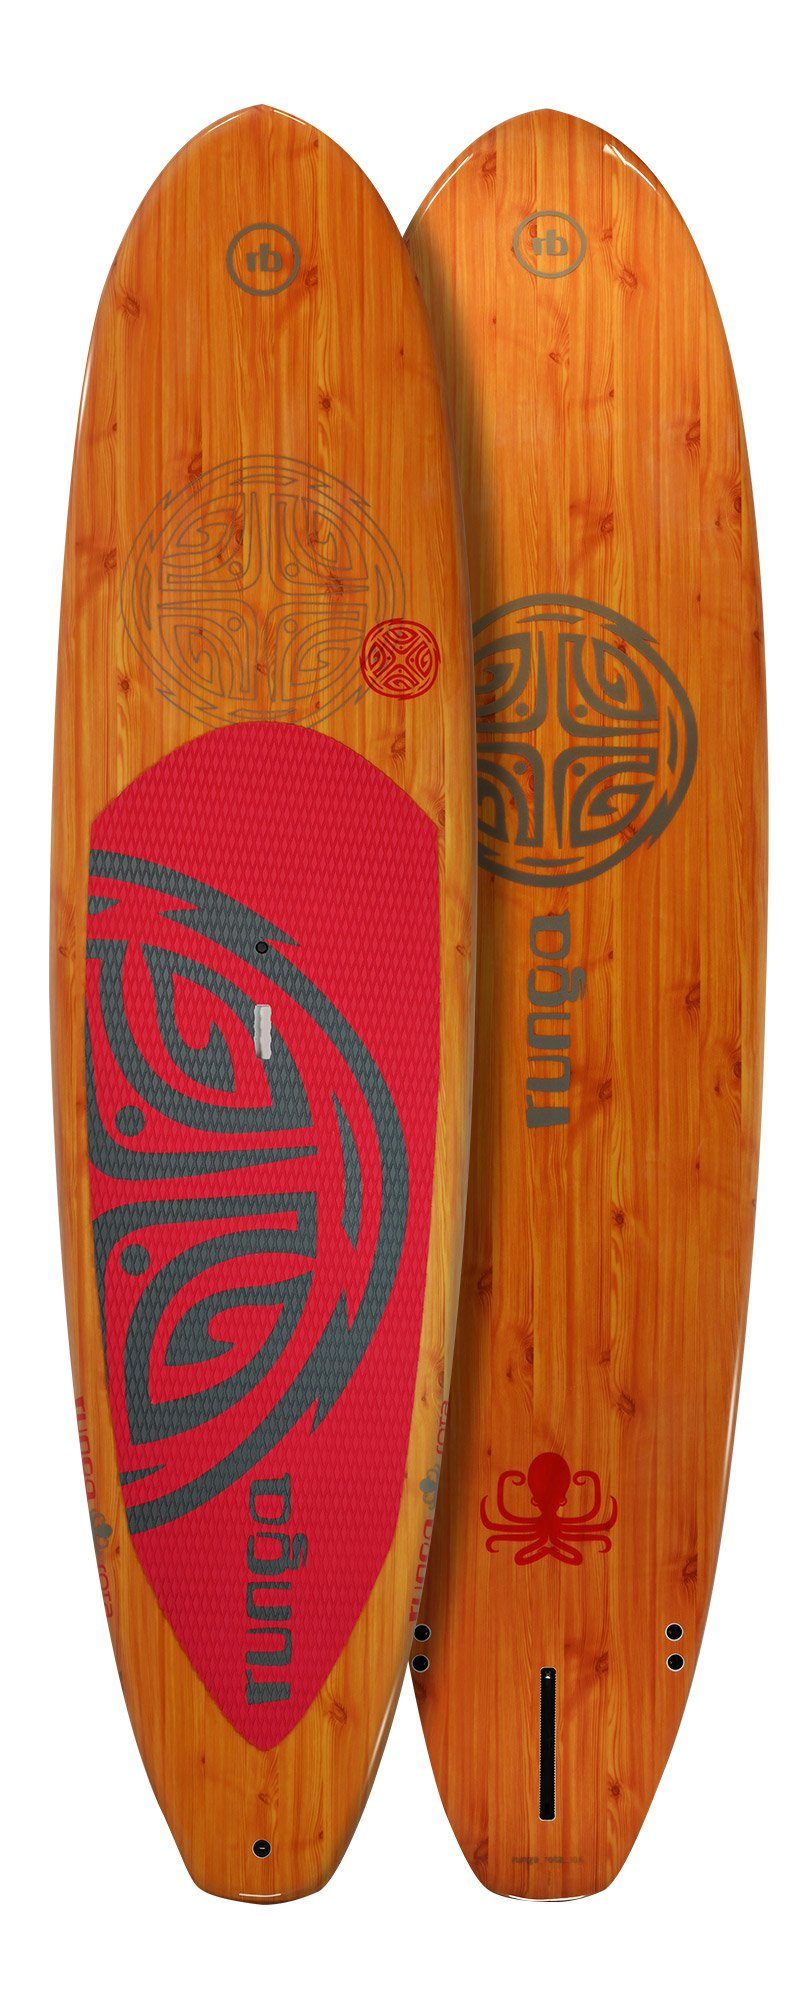 Hard Inkl. RED SUP, Runga-Boards coiled 3-tlg. (9.6, Allrounder, Paddling SUP-Board & Board Finnen-Set) ROTA Up leash Stand